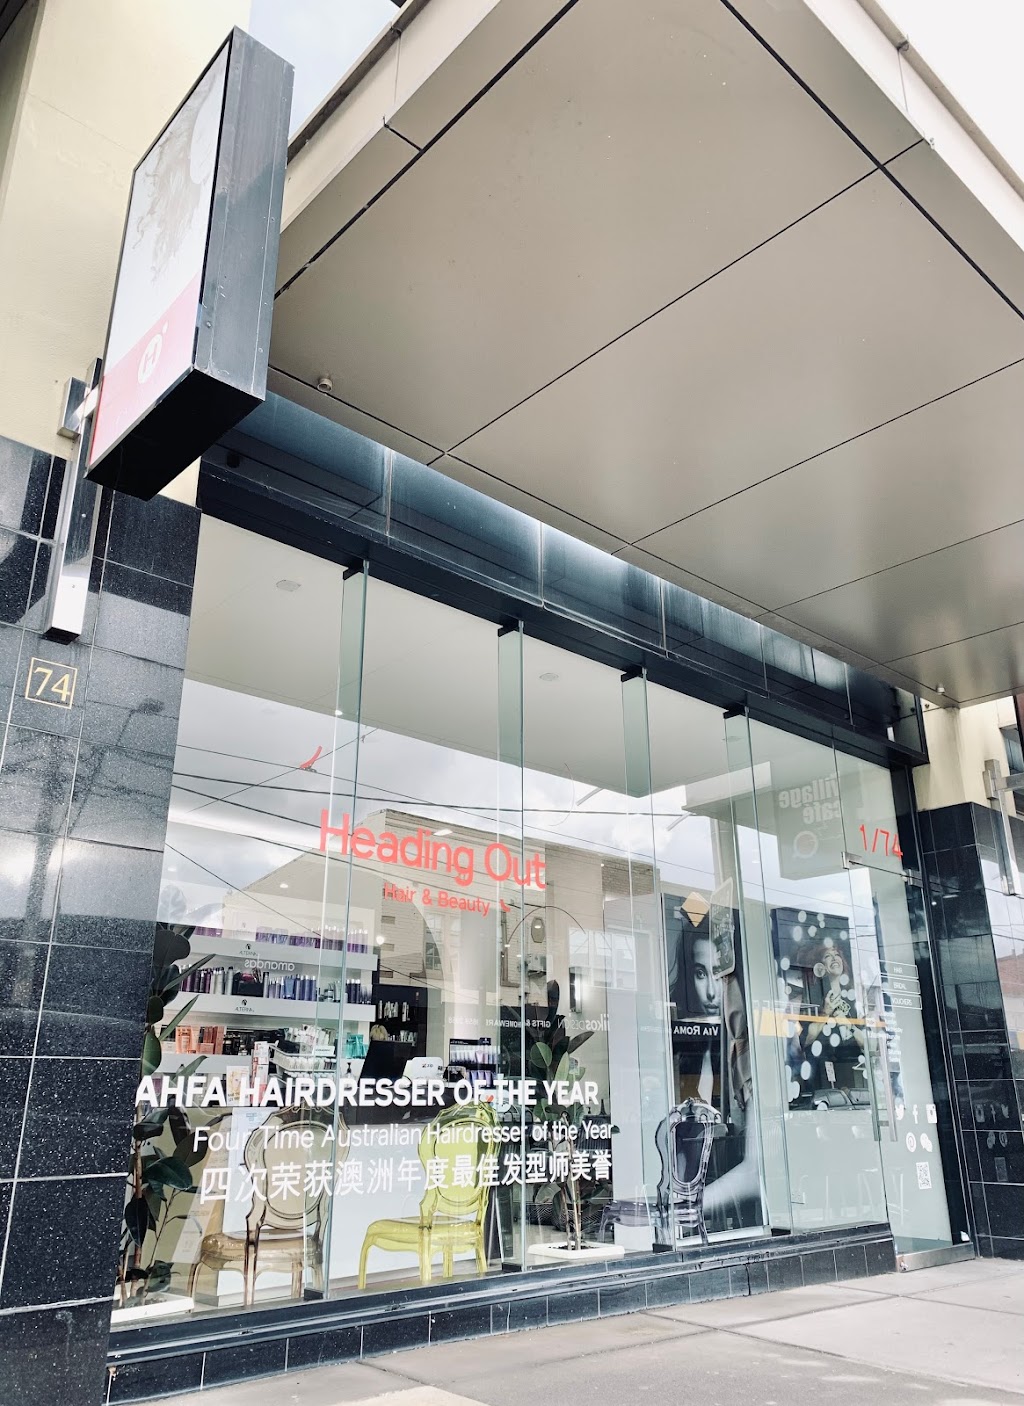 Heading Out Hair & Beauty | hair care | 1/74 Doncaster Rd, Balwyn North VIC 3104, Australia | 0398591555 OR +61 3 9859 1555